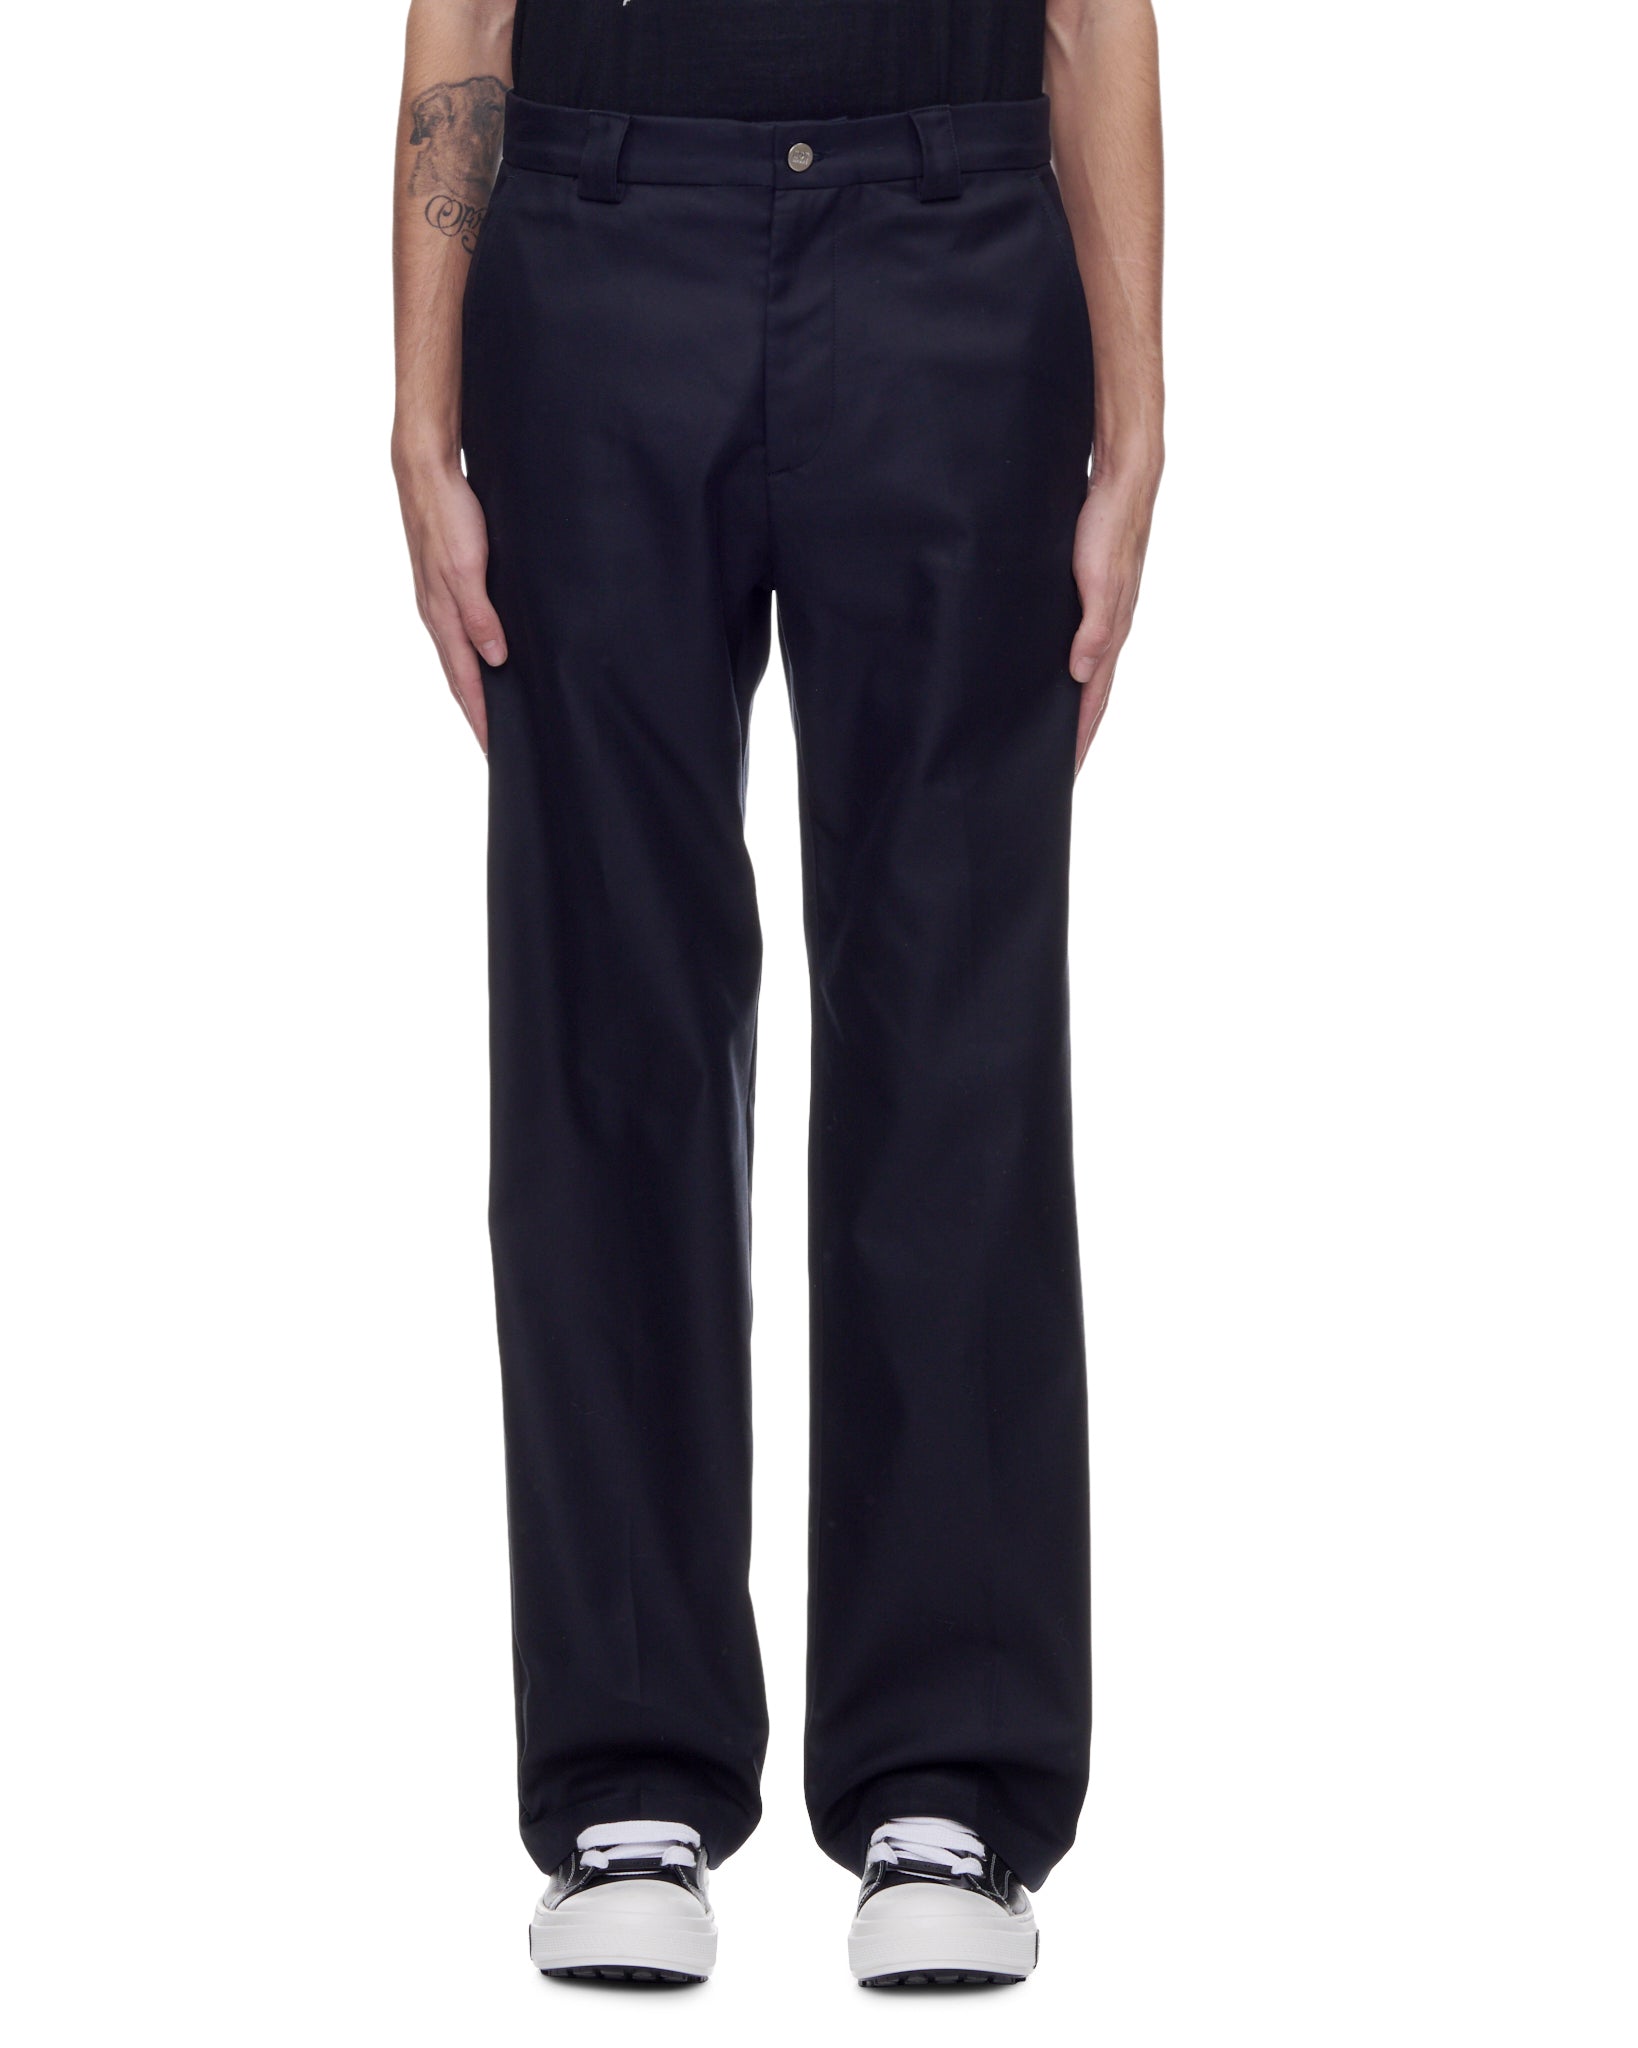 Worker Pant